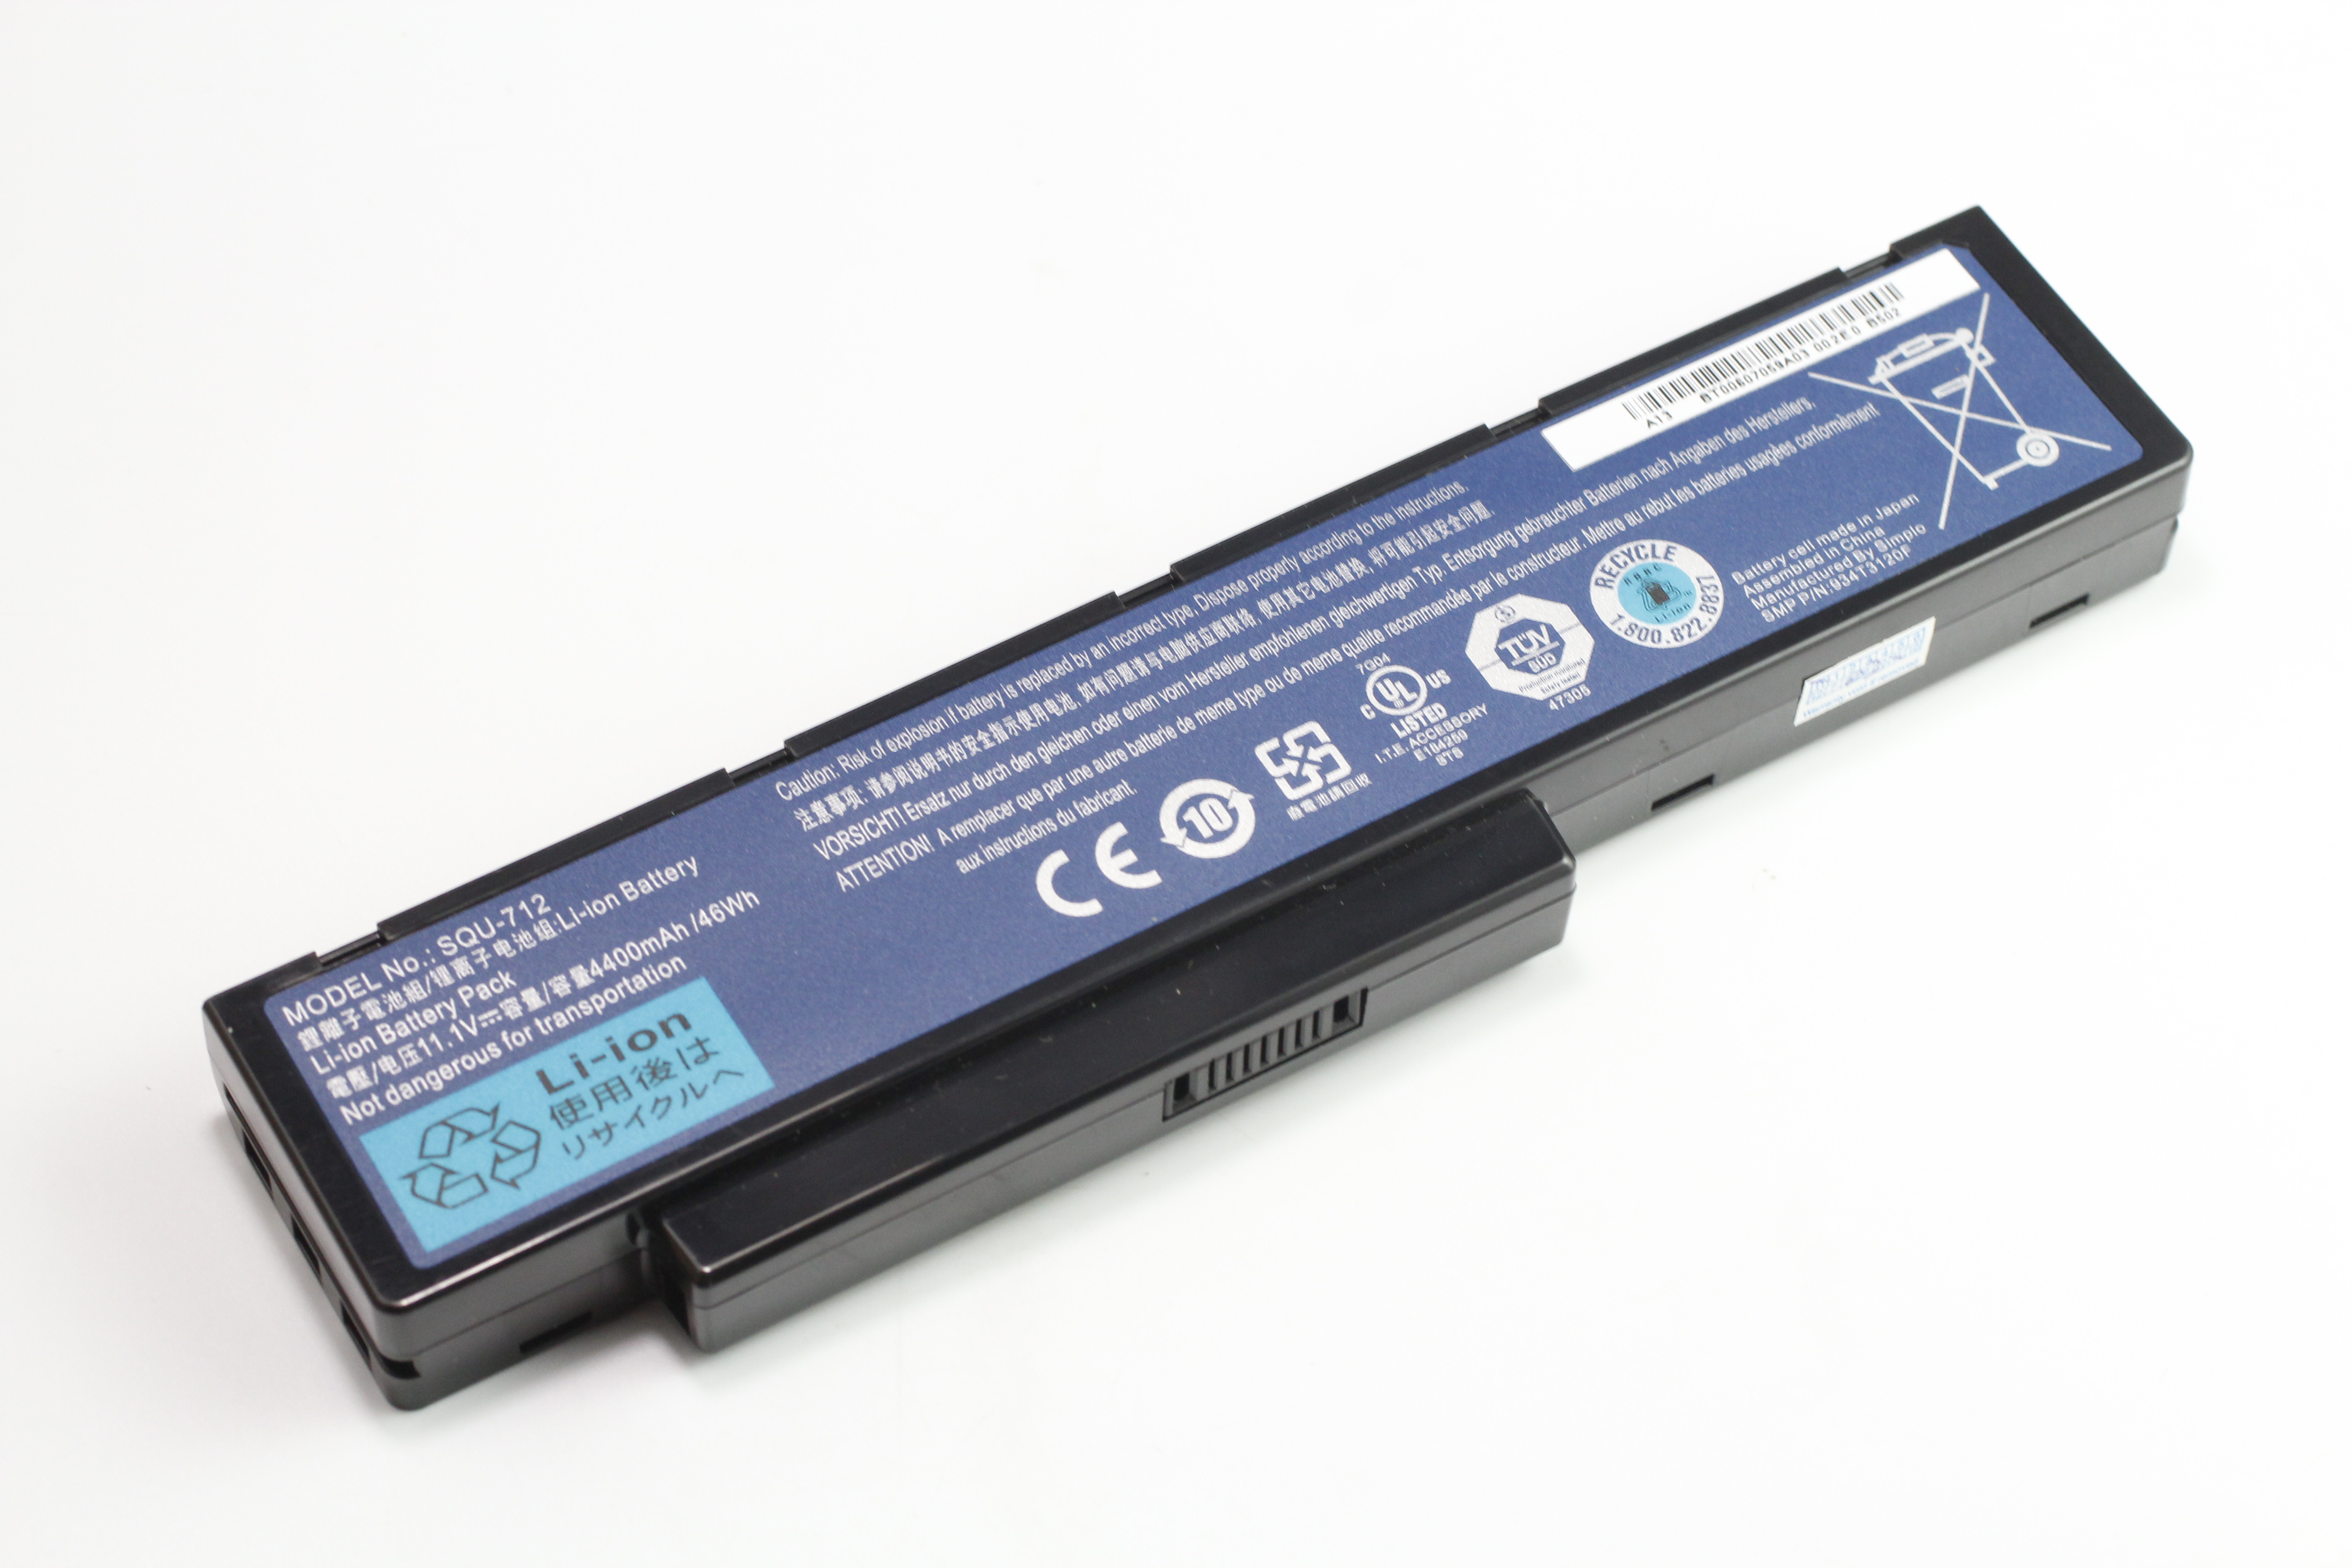 Genuine Packard Bell SQU-712, 934T3120F, BT.00607.059 EasyNote MH35 MH36 MH45 MH48 MH85 Battery